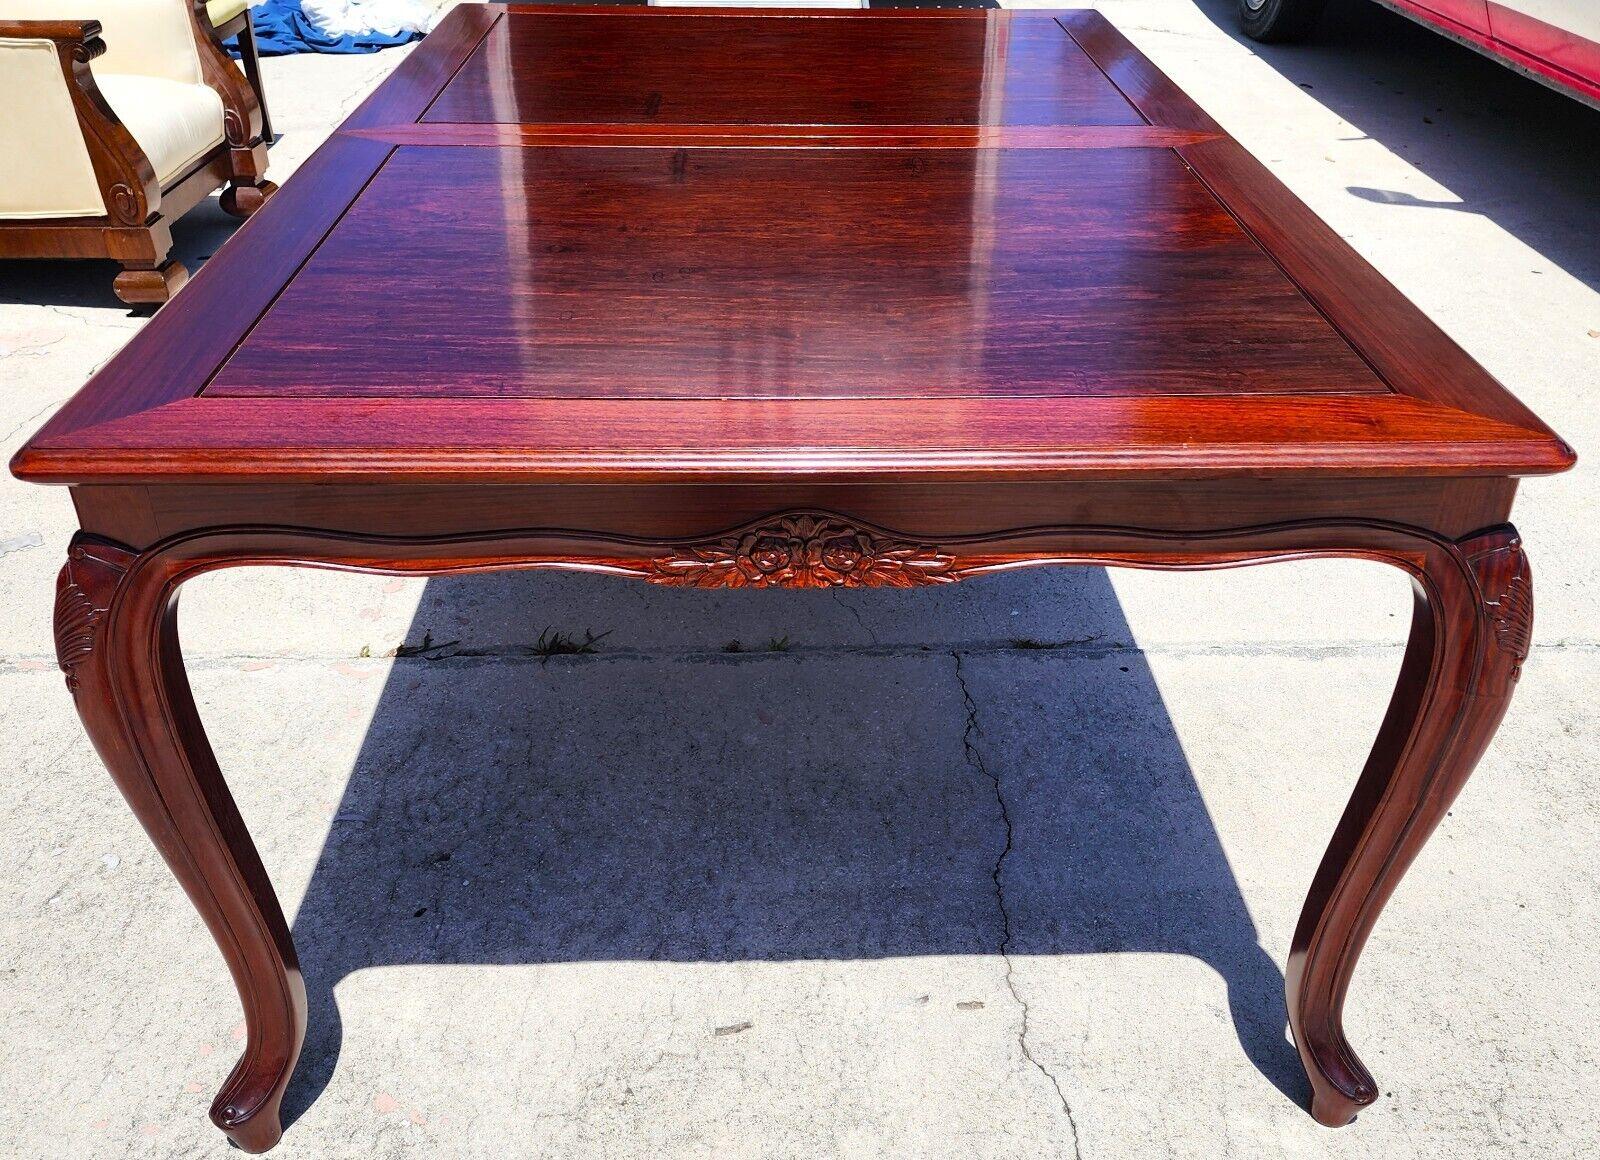 For FULL item description click on CONTINUE READING at the bottom of this page.

Offering One Of Our Recent Palm Beach Estate Fine Furniture Acquisitions Of A
Vintage Asian Chinoiserie Rosewood Dining Table with 2 Leaves 

We also have the matching